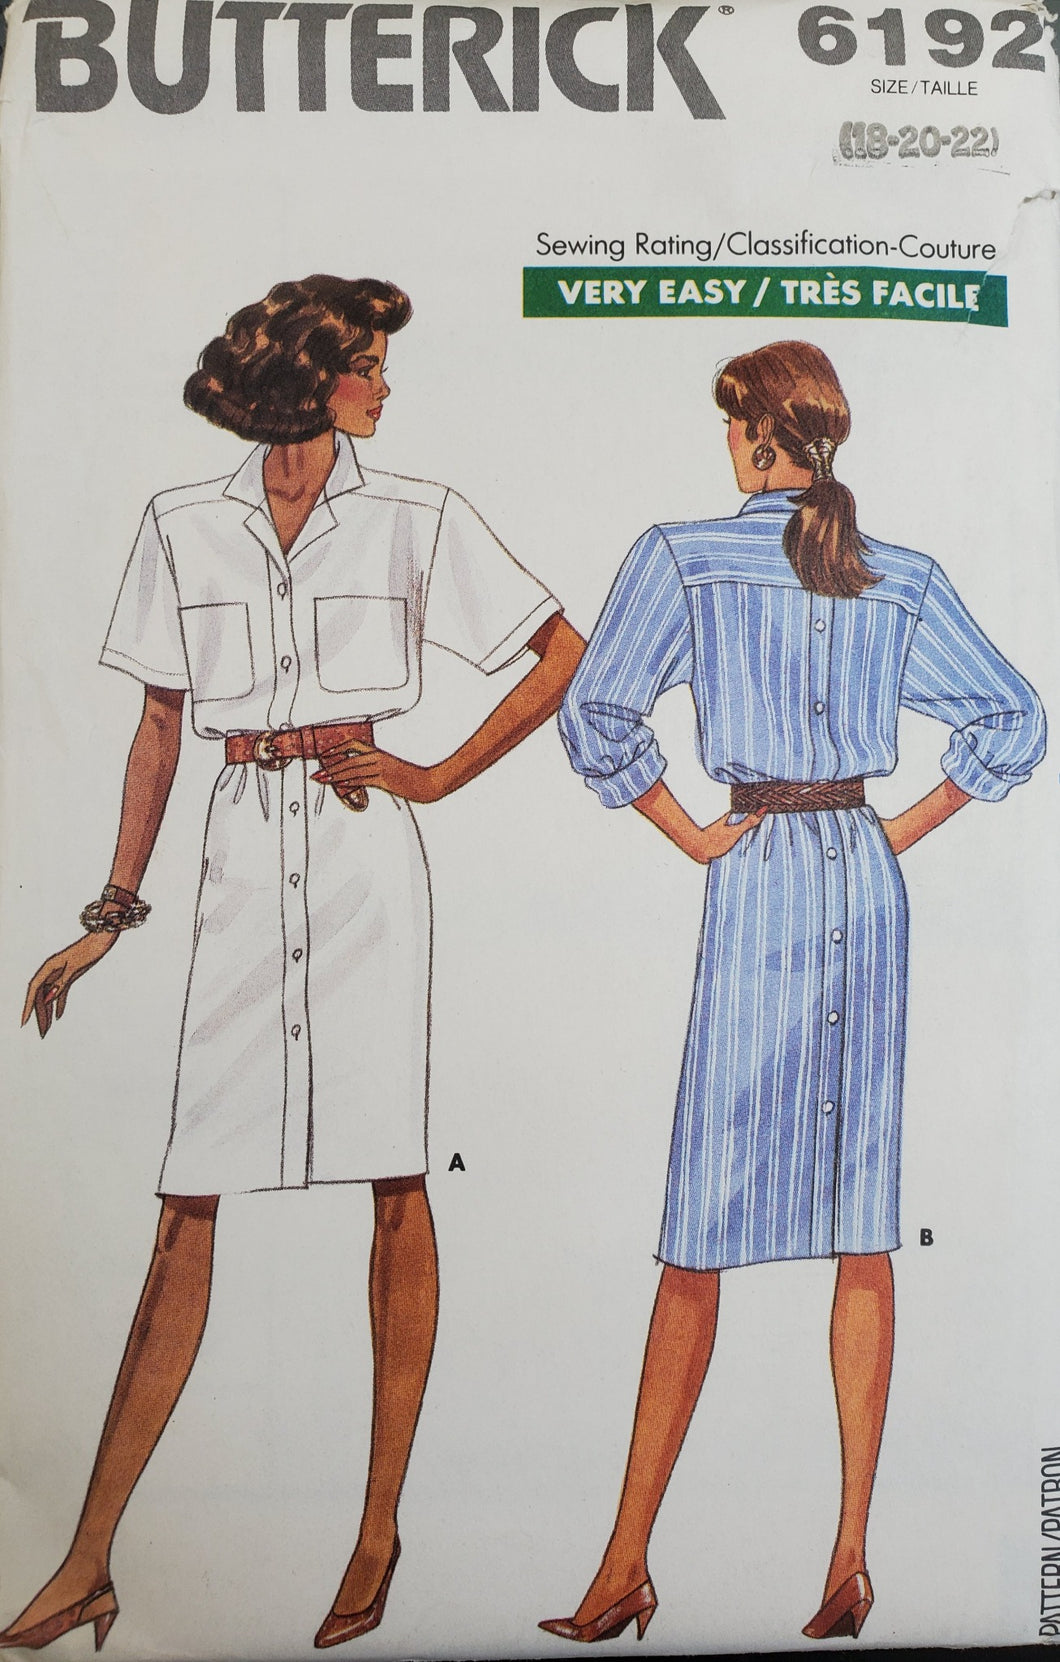 Butterick Pattern 6192, UNCUT, Very Easy Misses Shirtdress, Sizes 18-20-22